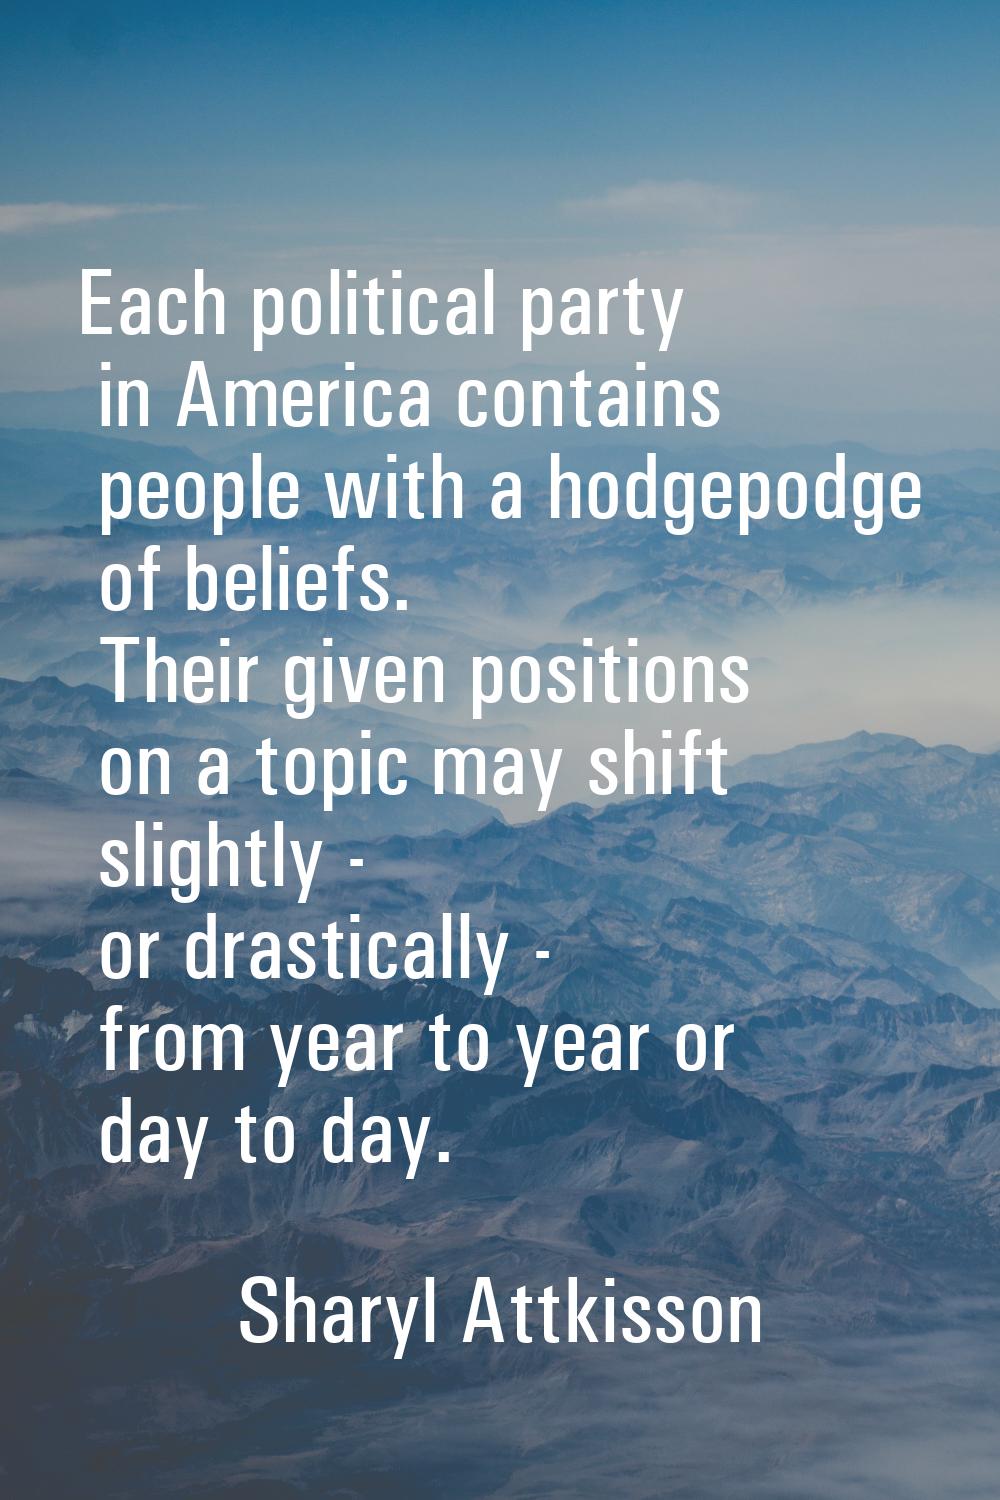 Each political party in America contains people with a hodgepodge of beliefs. Their given positions